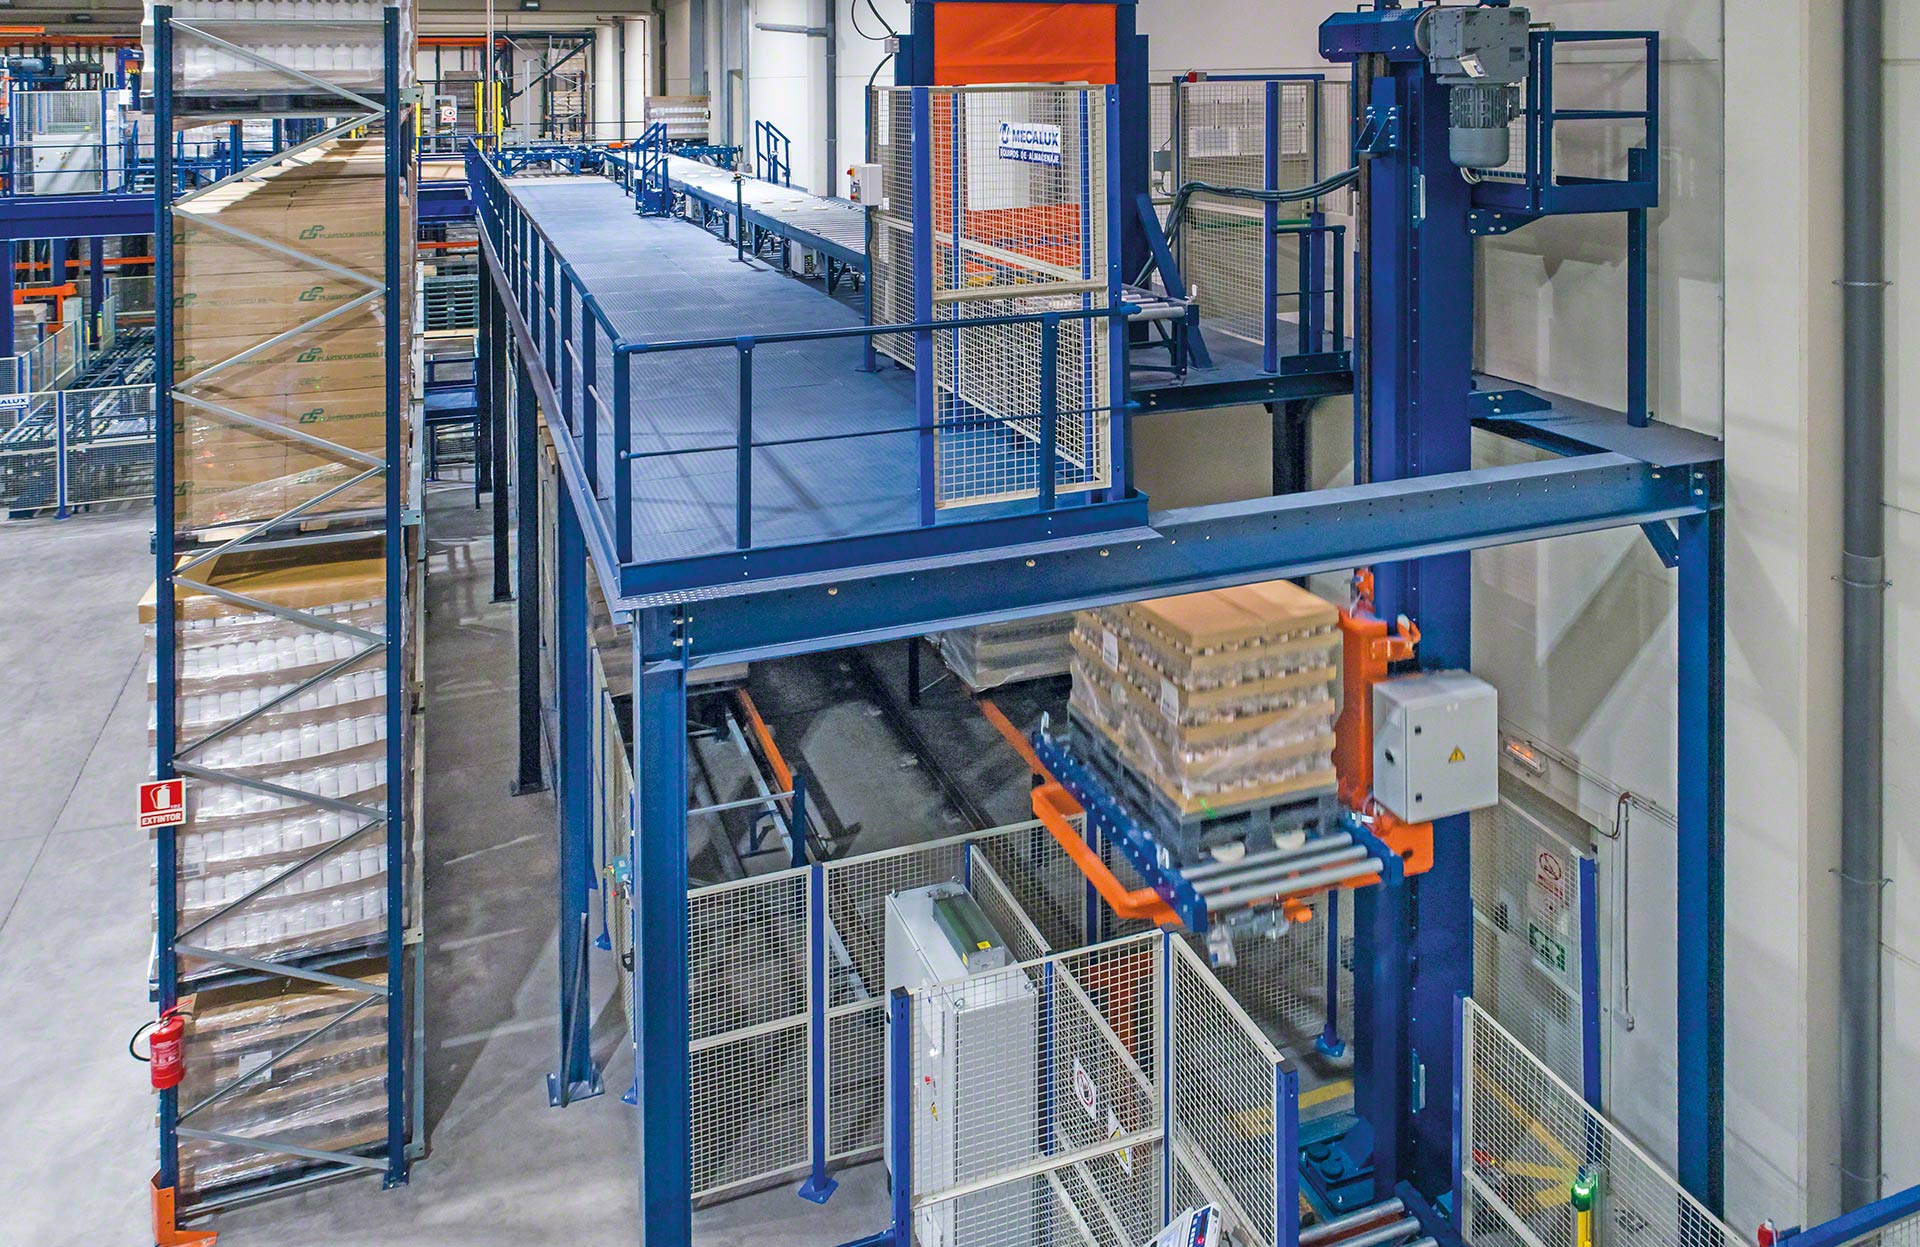 Vertical lift conveyors connect different floors